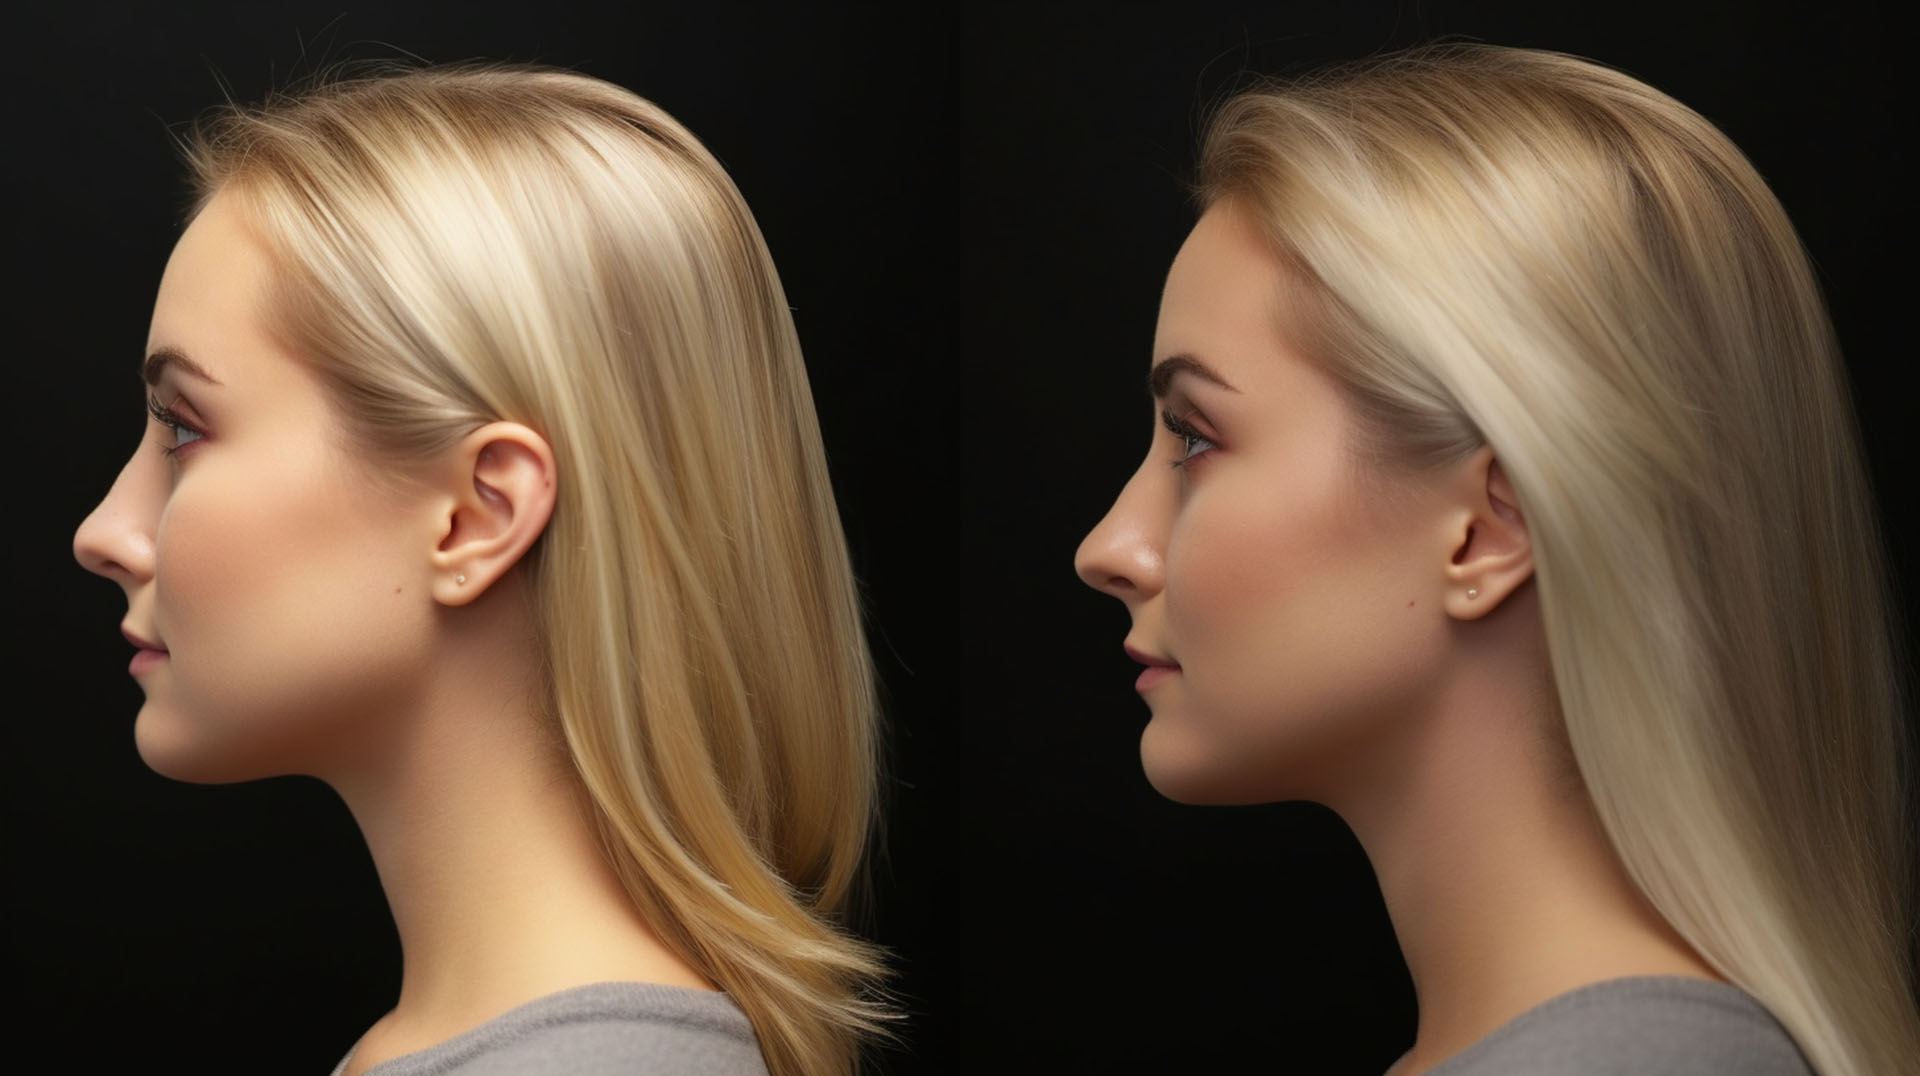 Rhinoplasty Before and After Photo Cambridge